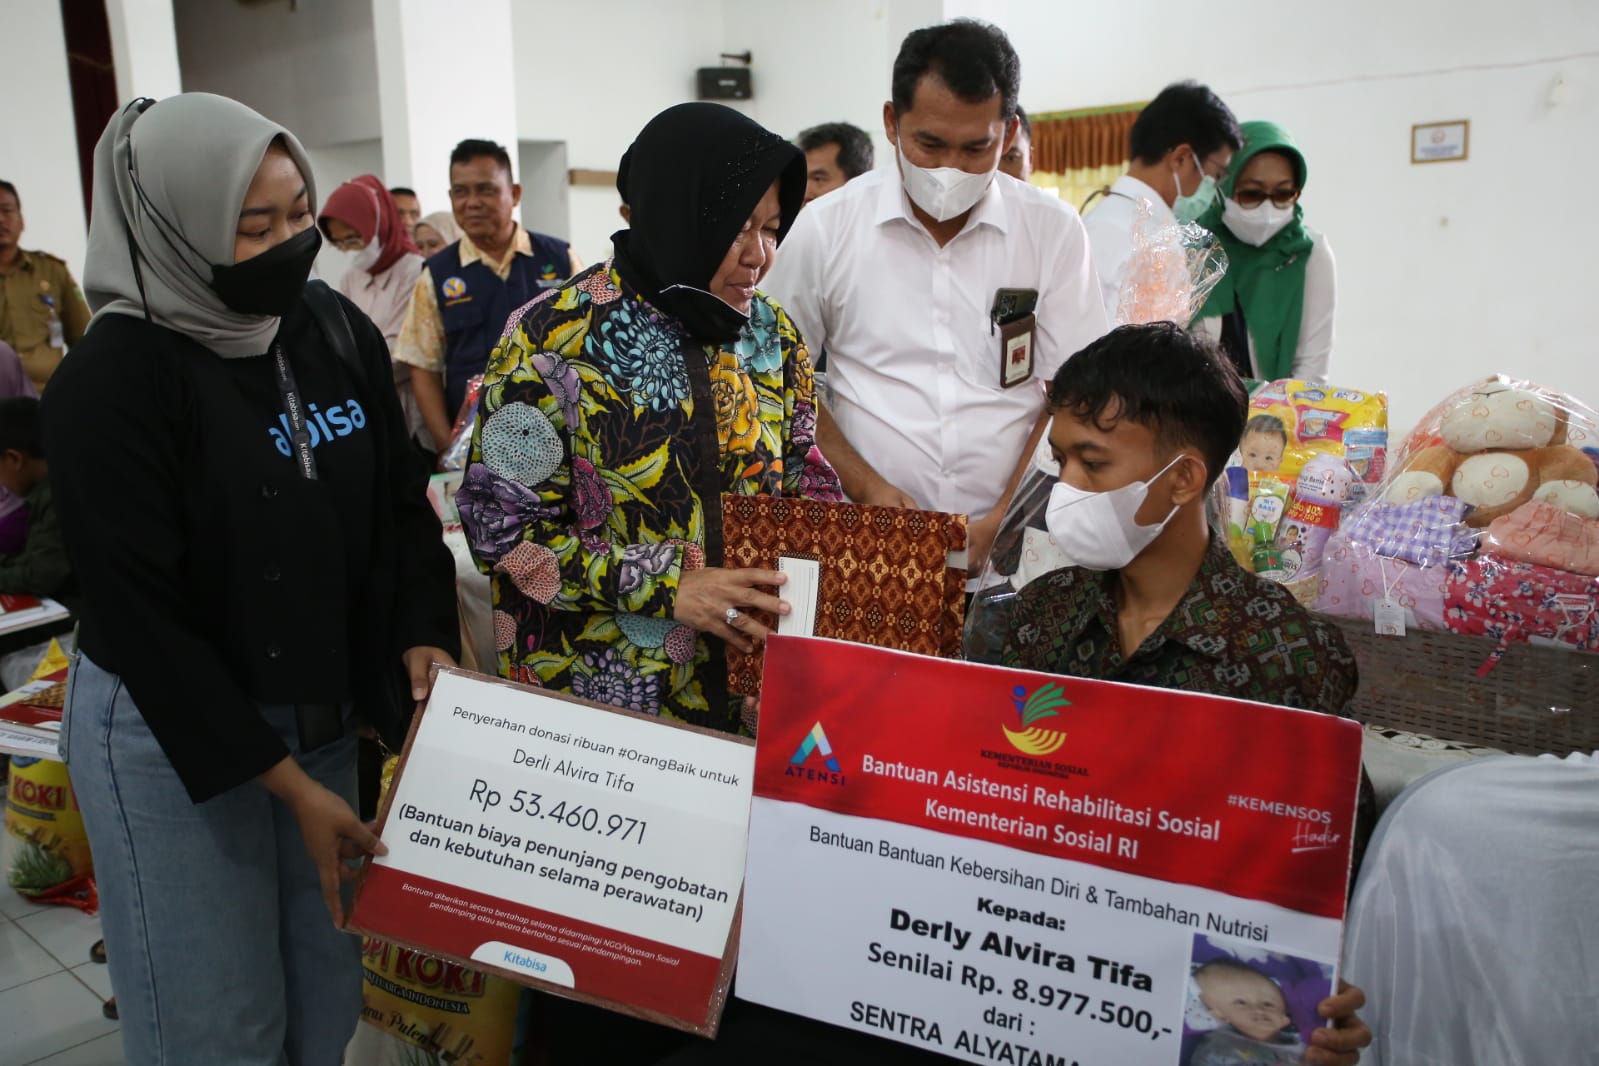 Minister of Social Affairs Risma Submits Donations and Assistance to 11 Children with Severe Illness